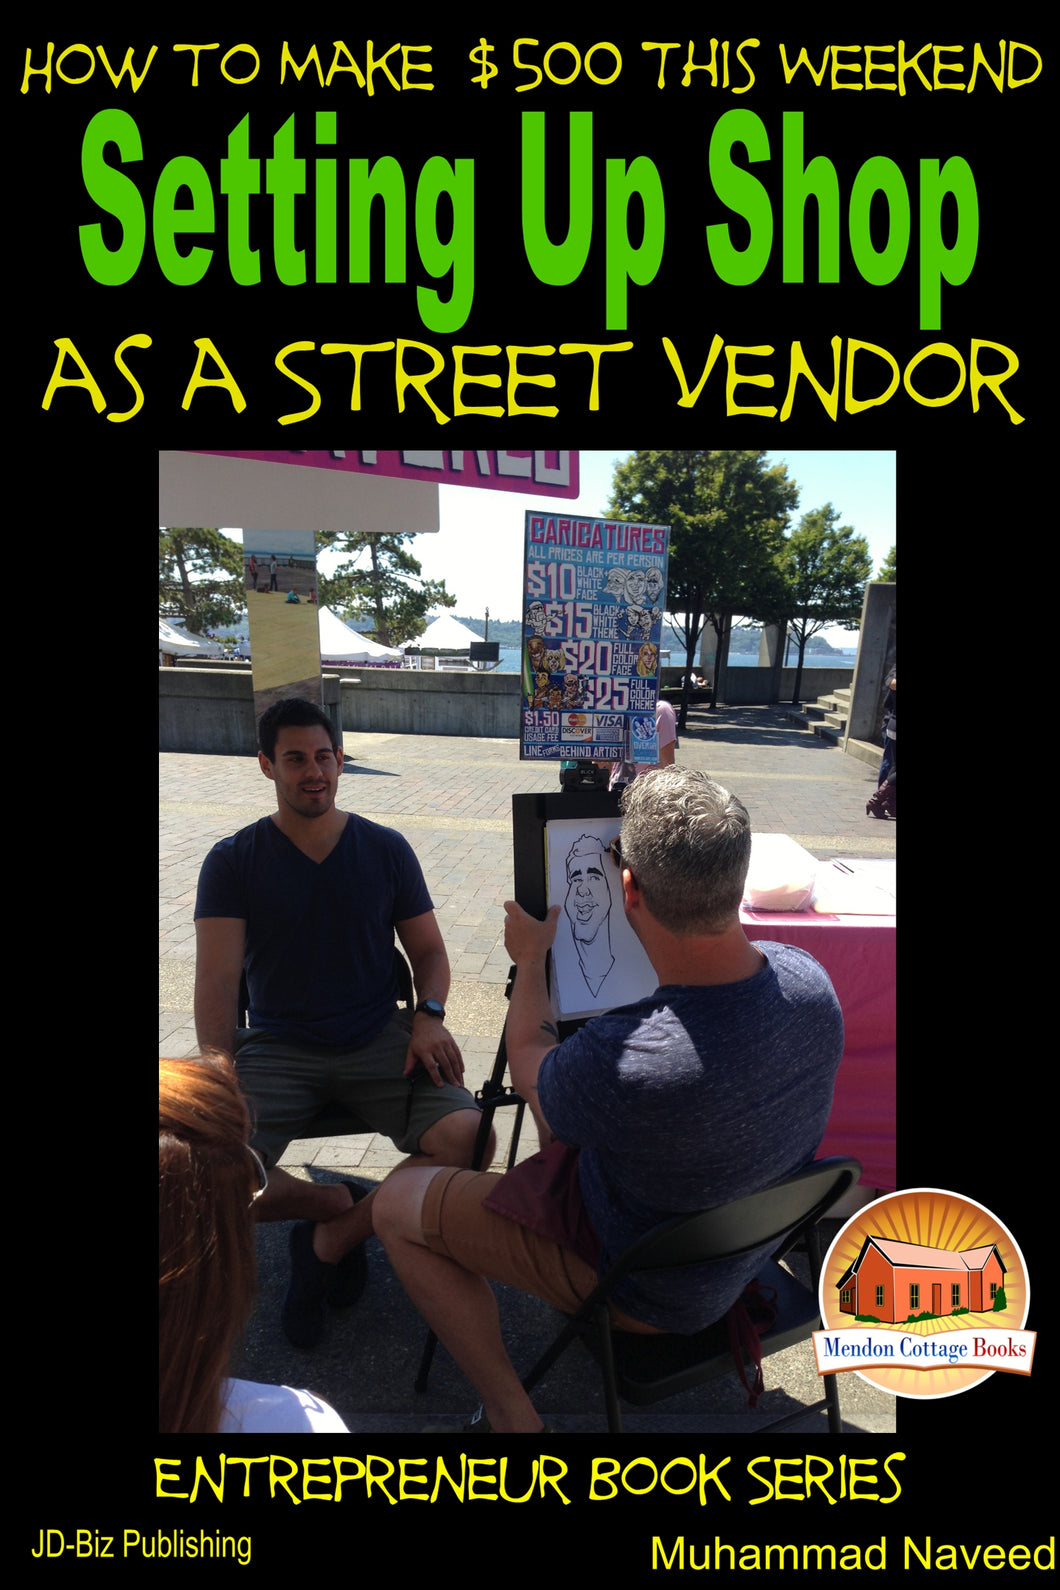 Make Money With Art - How to Make $500 This Weekend - Setting Up Shop as a Street Vendor